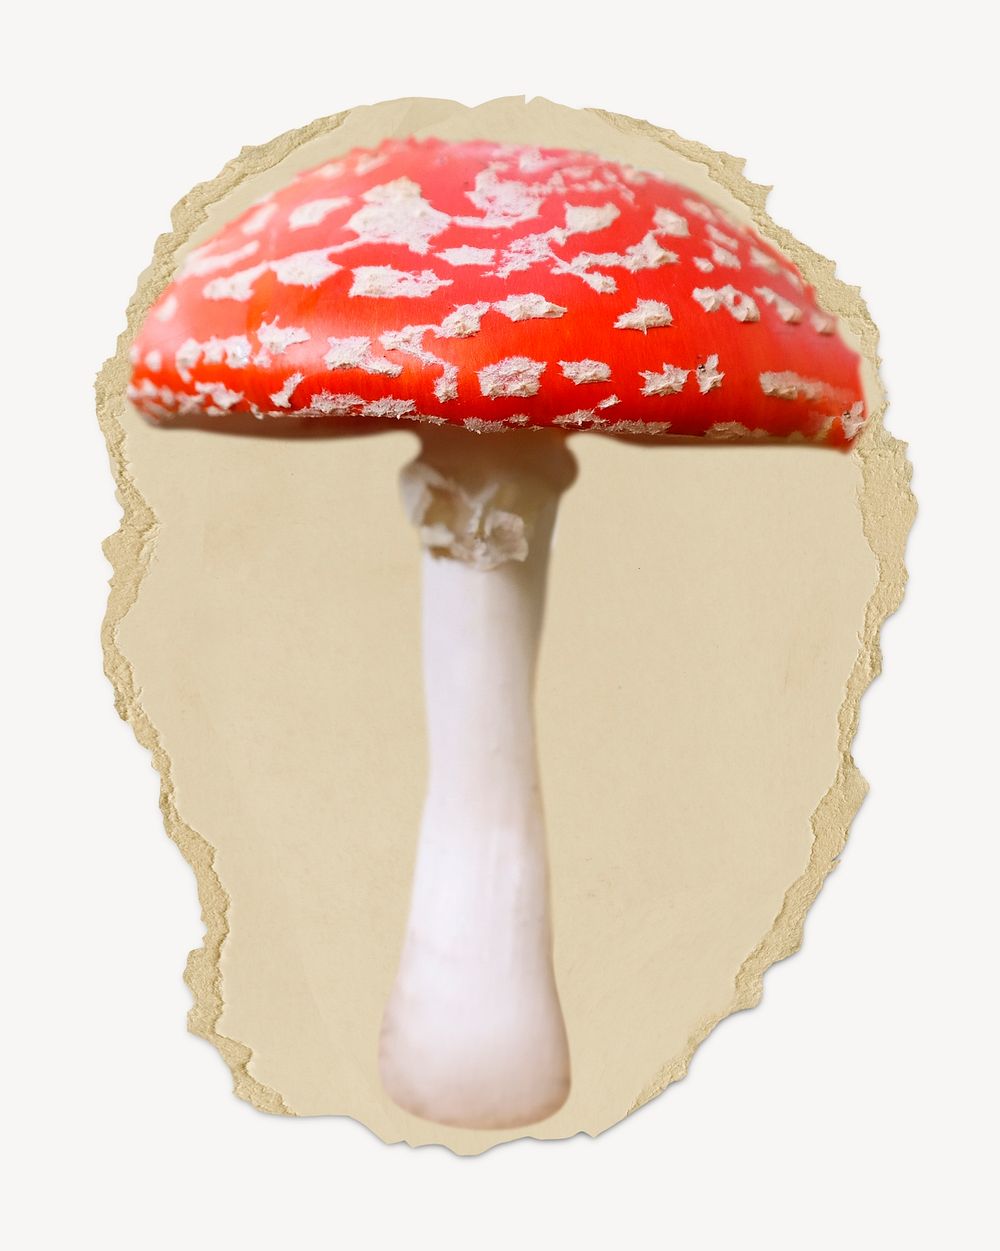 Poisonous mushroom, ripped paper collage element